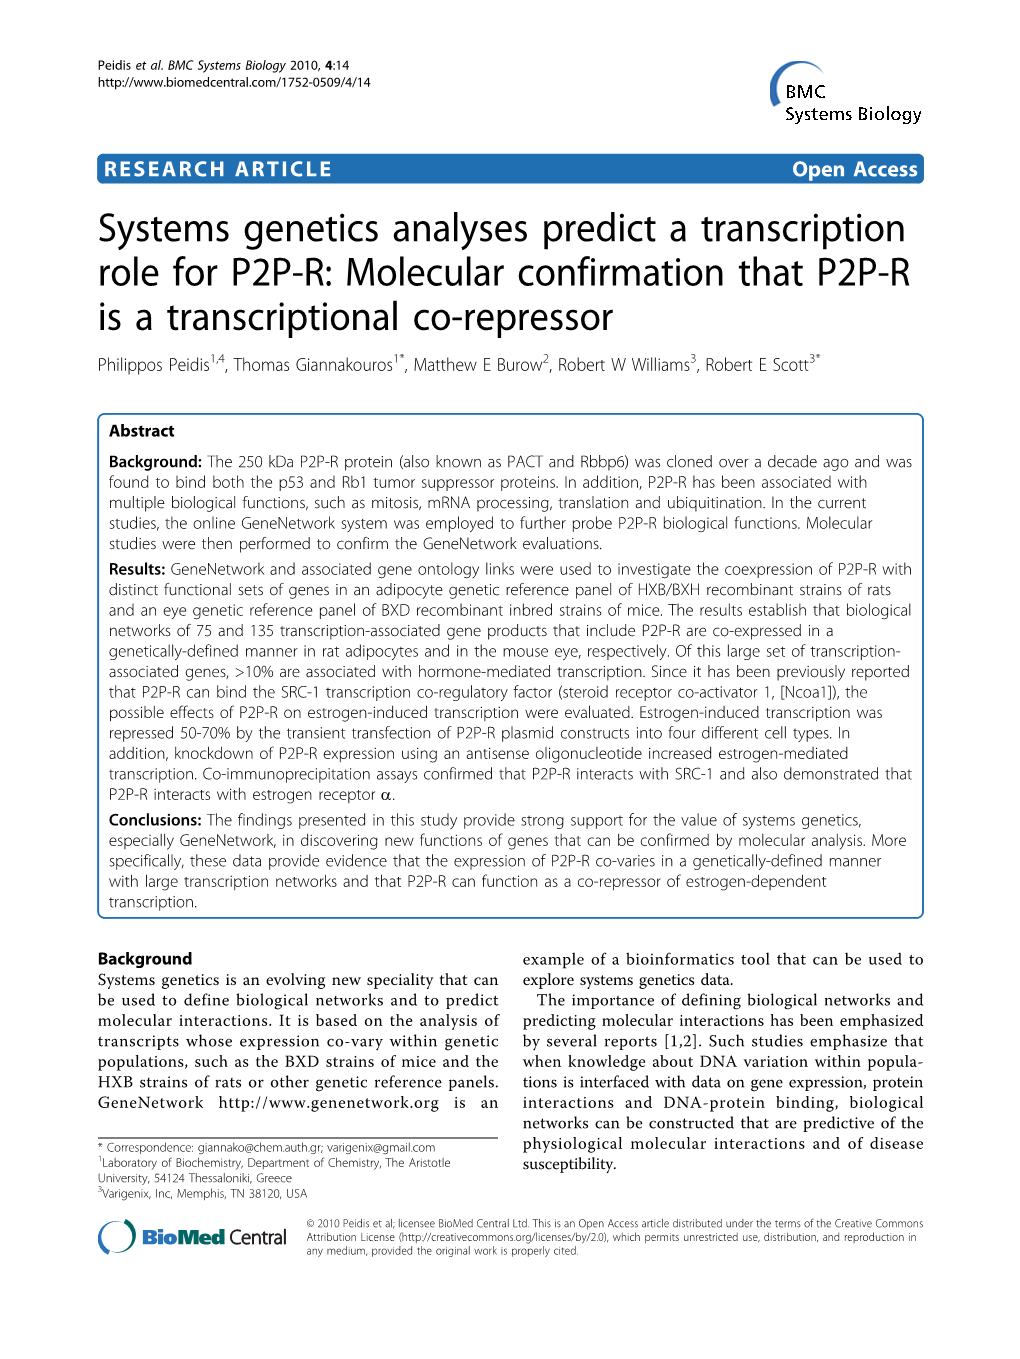 Systems Genetics Analyses Predict a Transcription Role